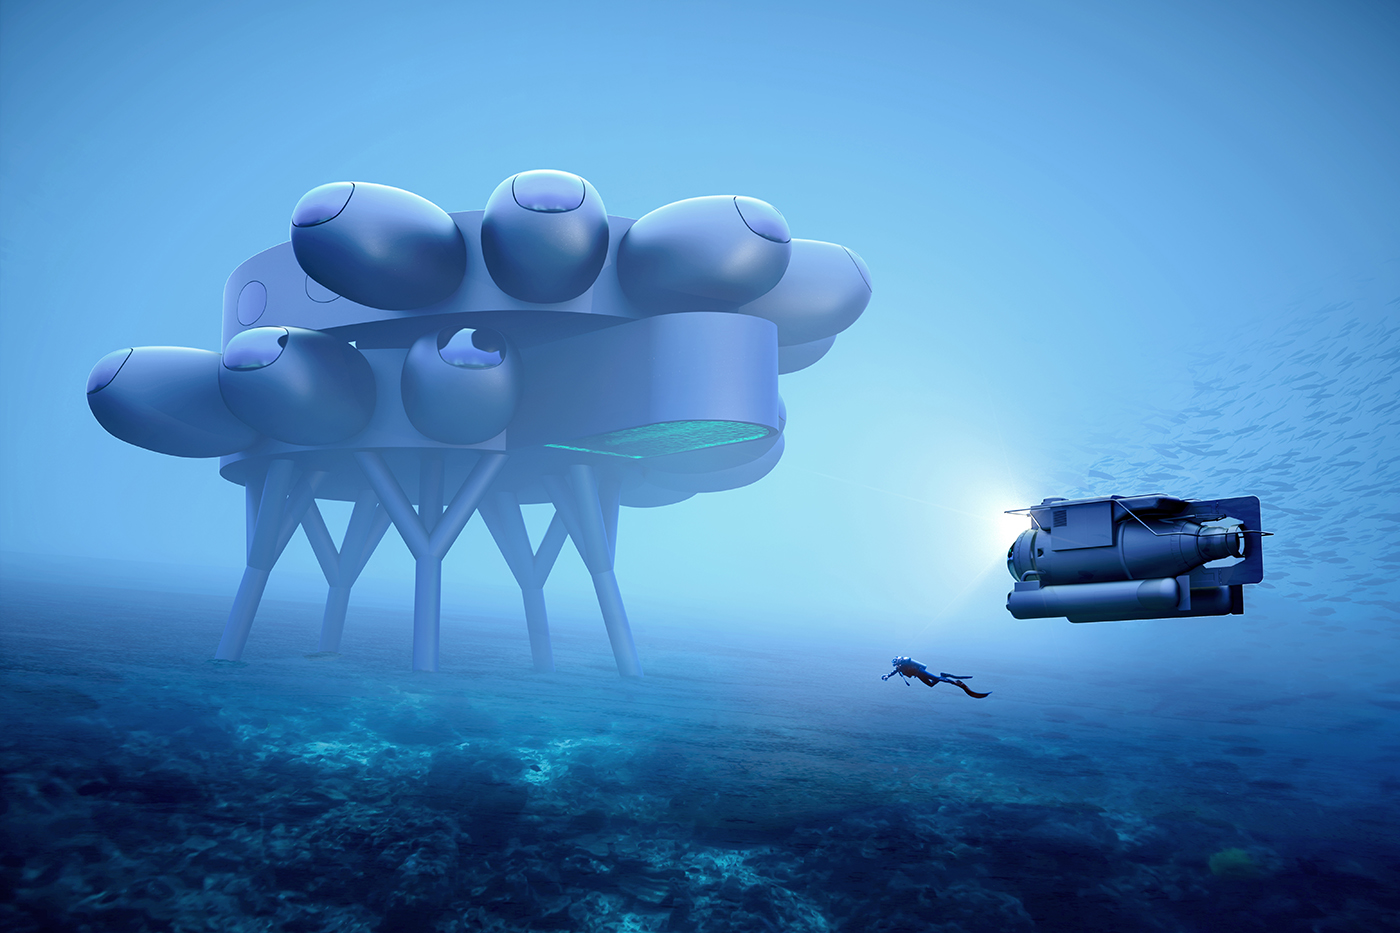 They’re planning to build a new space station… at the bottom of the ocean